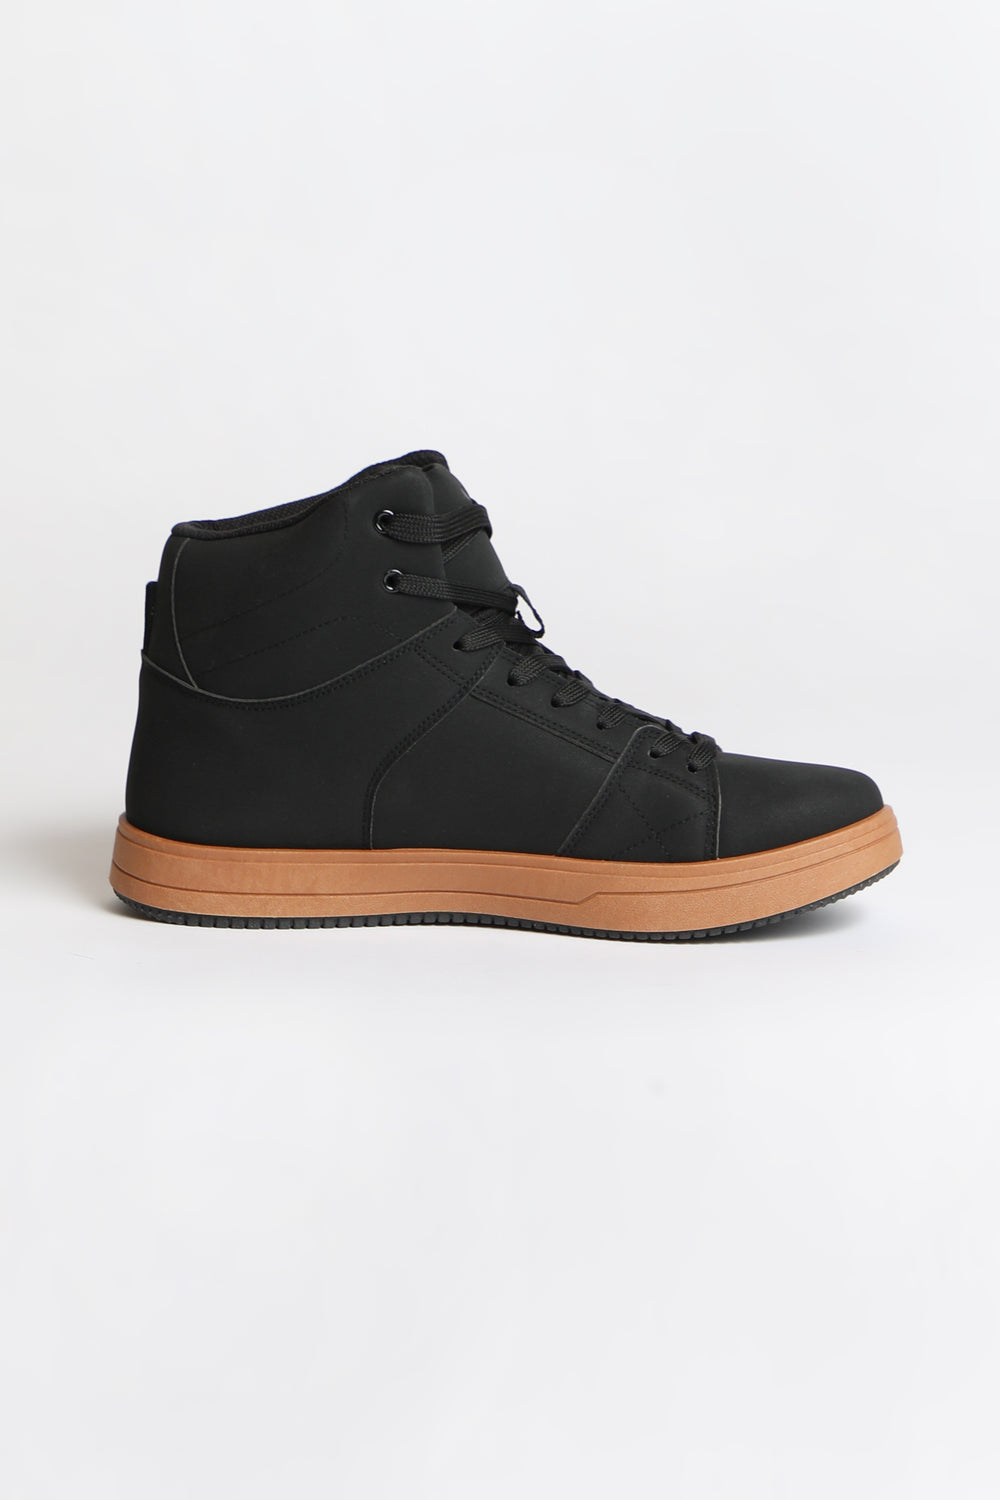 Chaussures Montantes Zoo York Homme Noir Pur